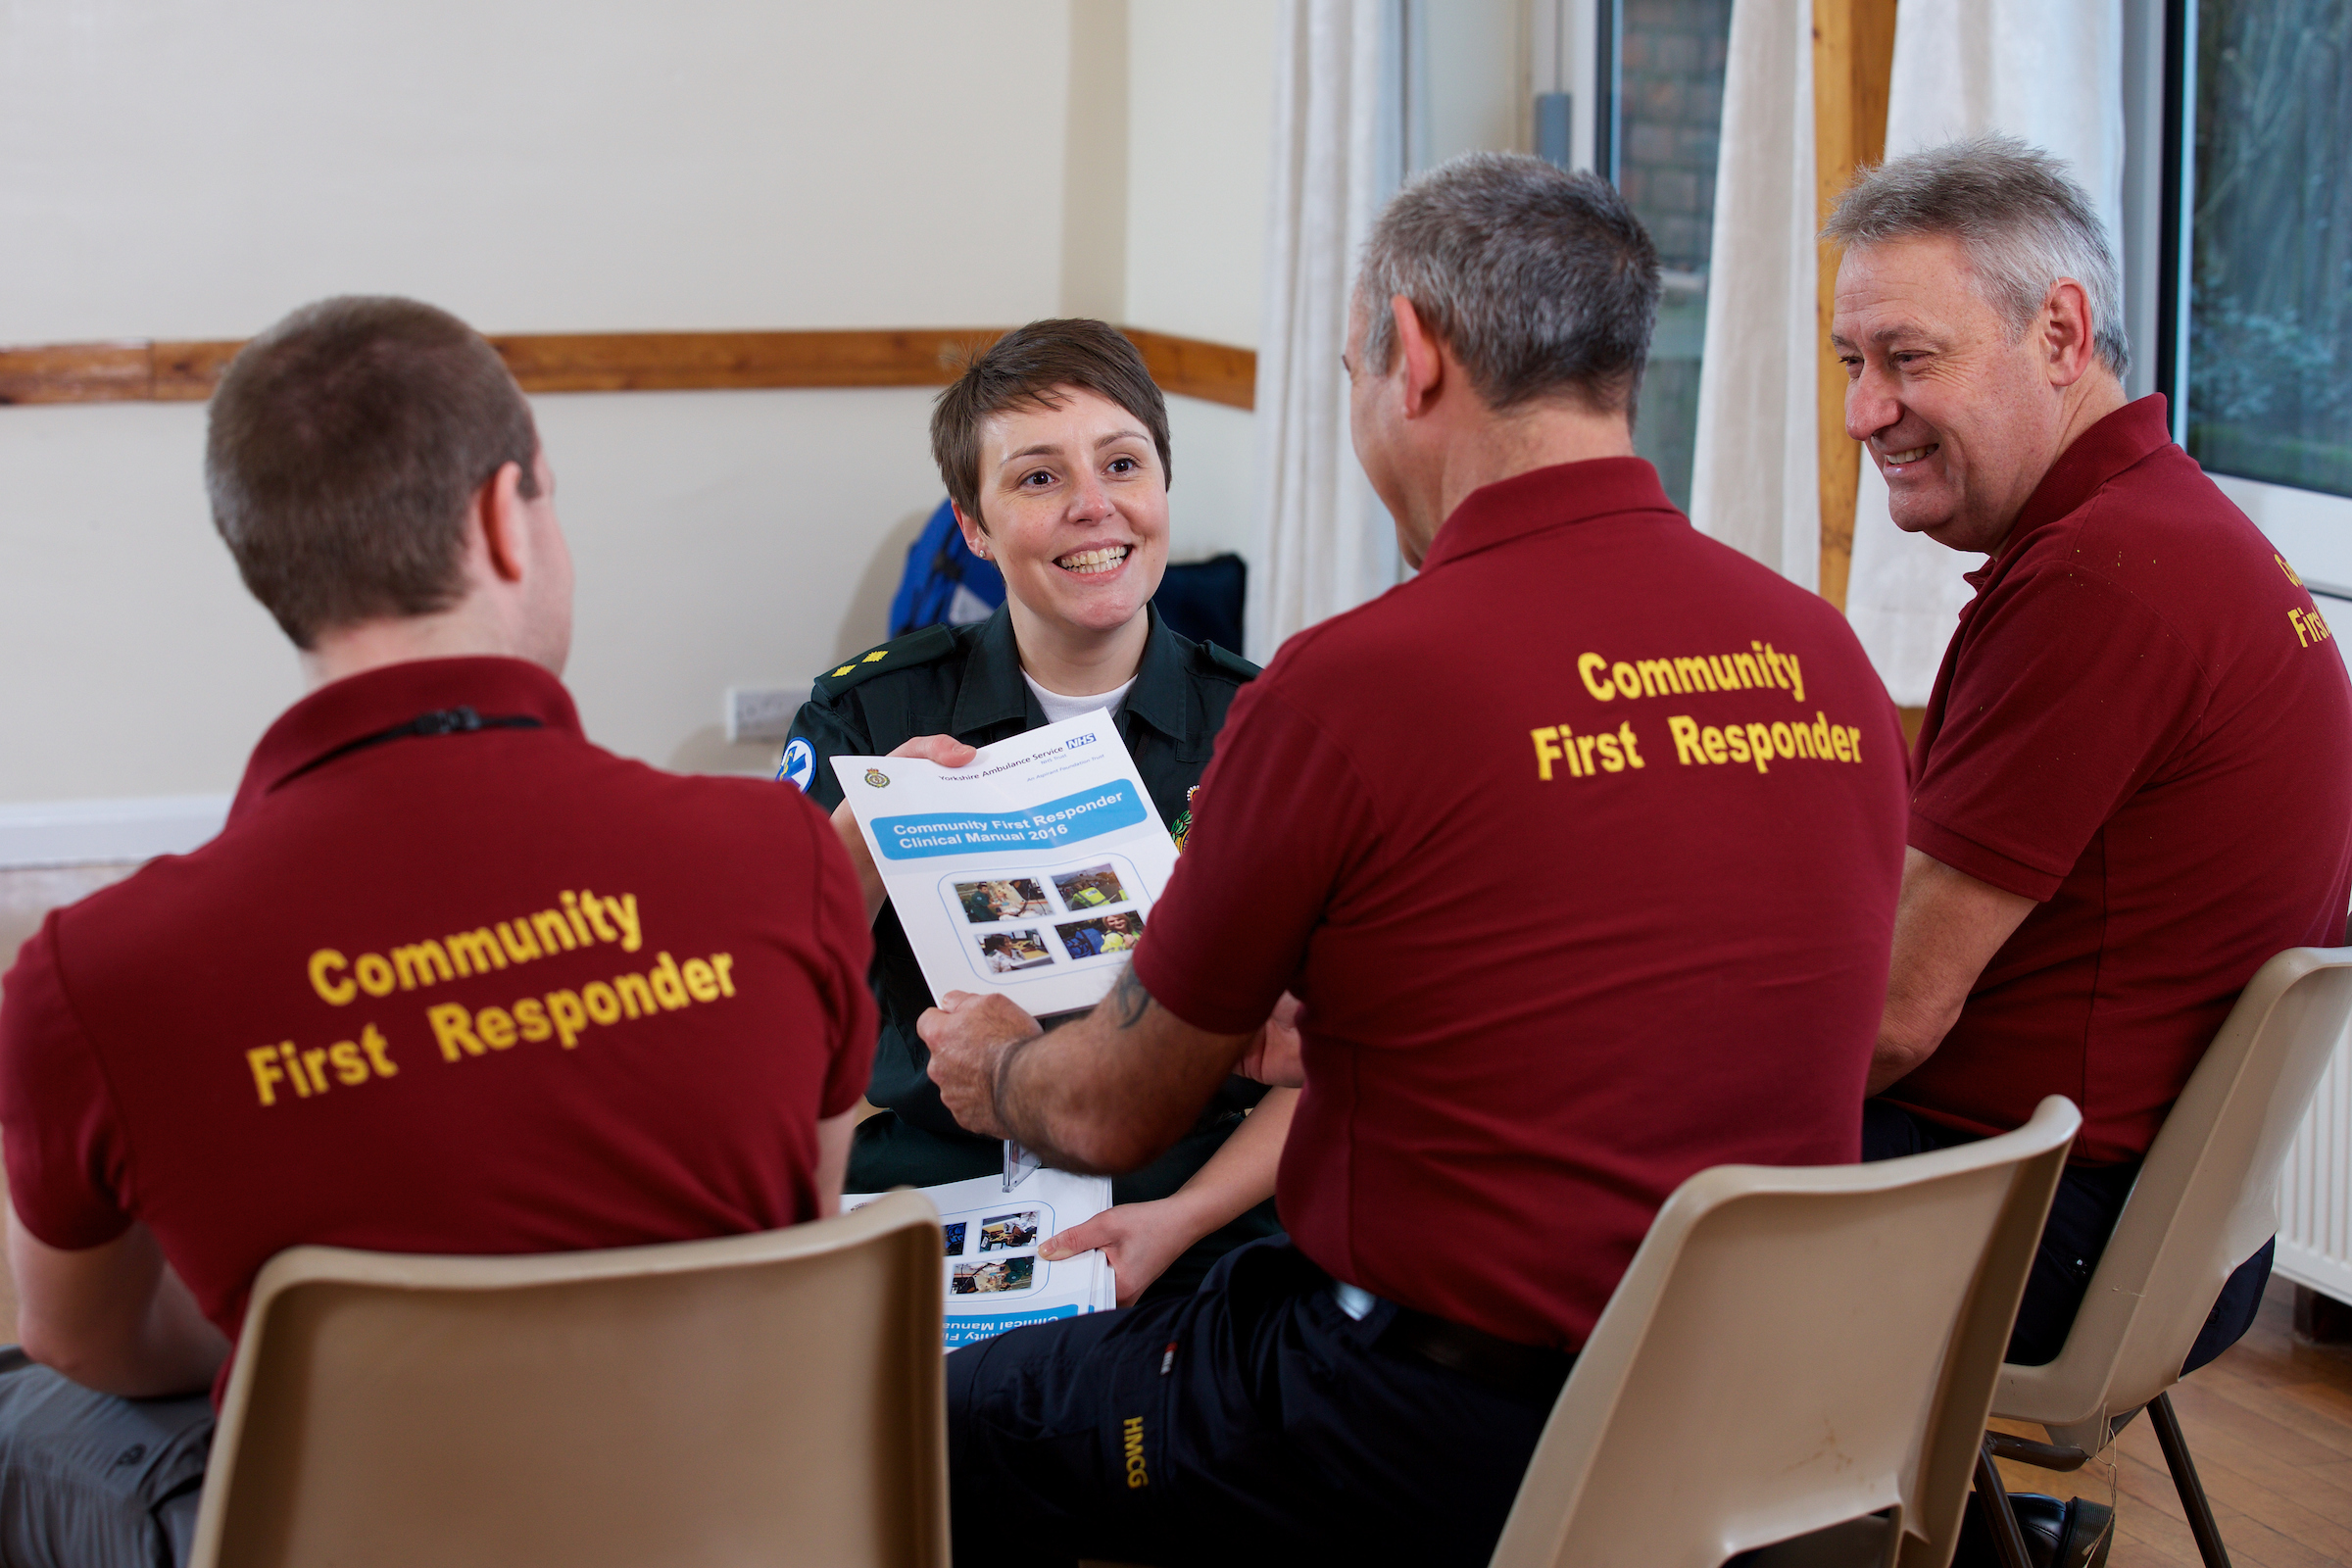 CFR Volunteers receiving training in a classroom from ambulance staff